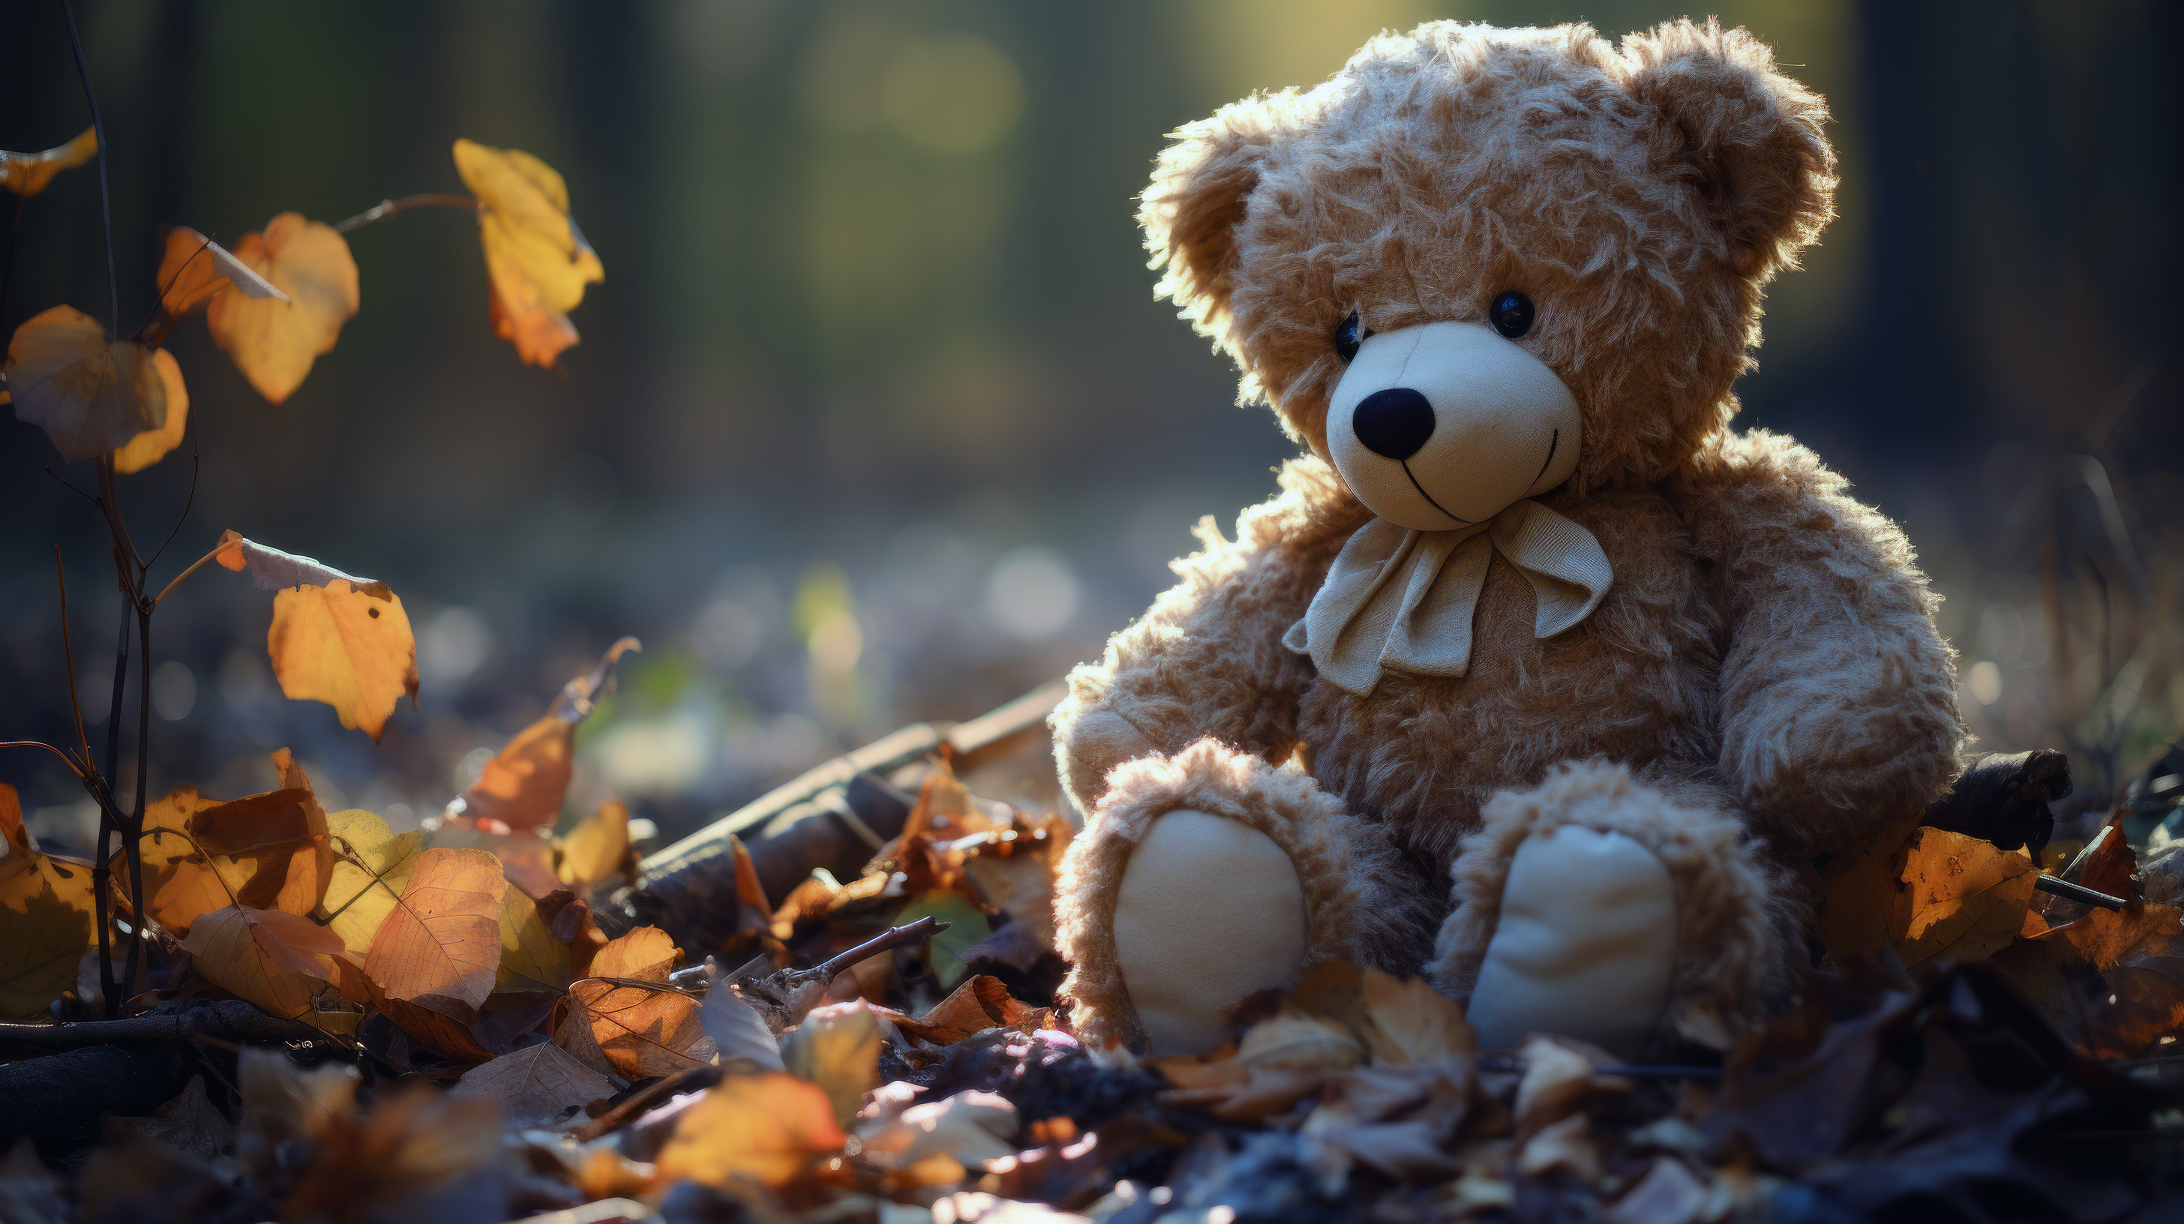 HD wallpaper of a fluffy teddy bear sitting among autumn leaves, creating a warm and cozy desktop background.